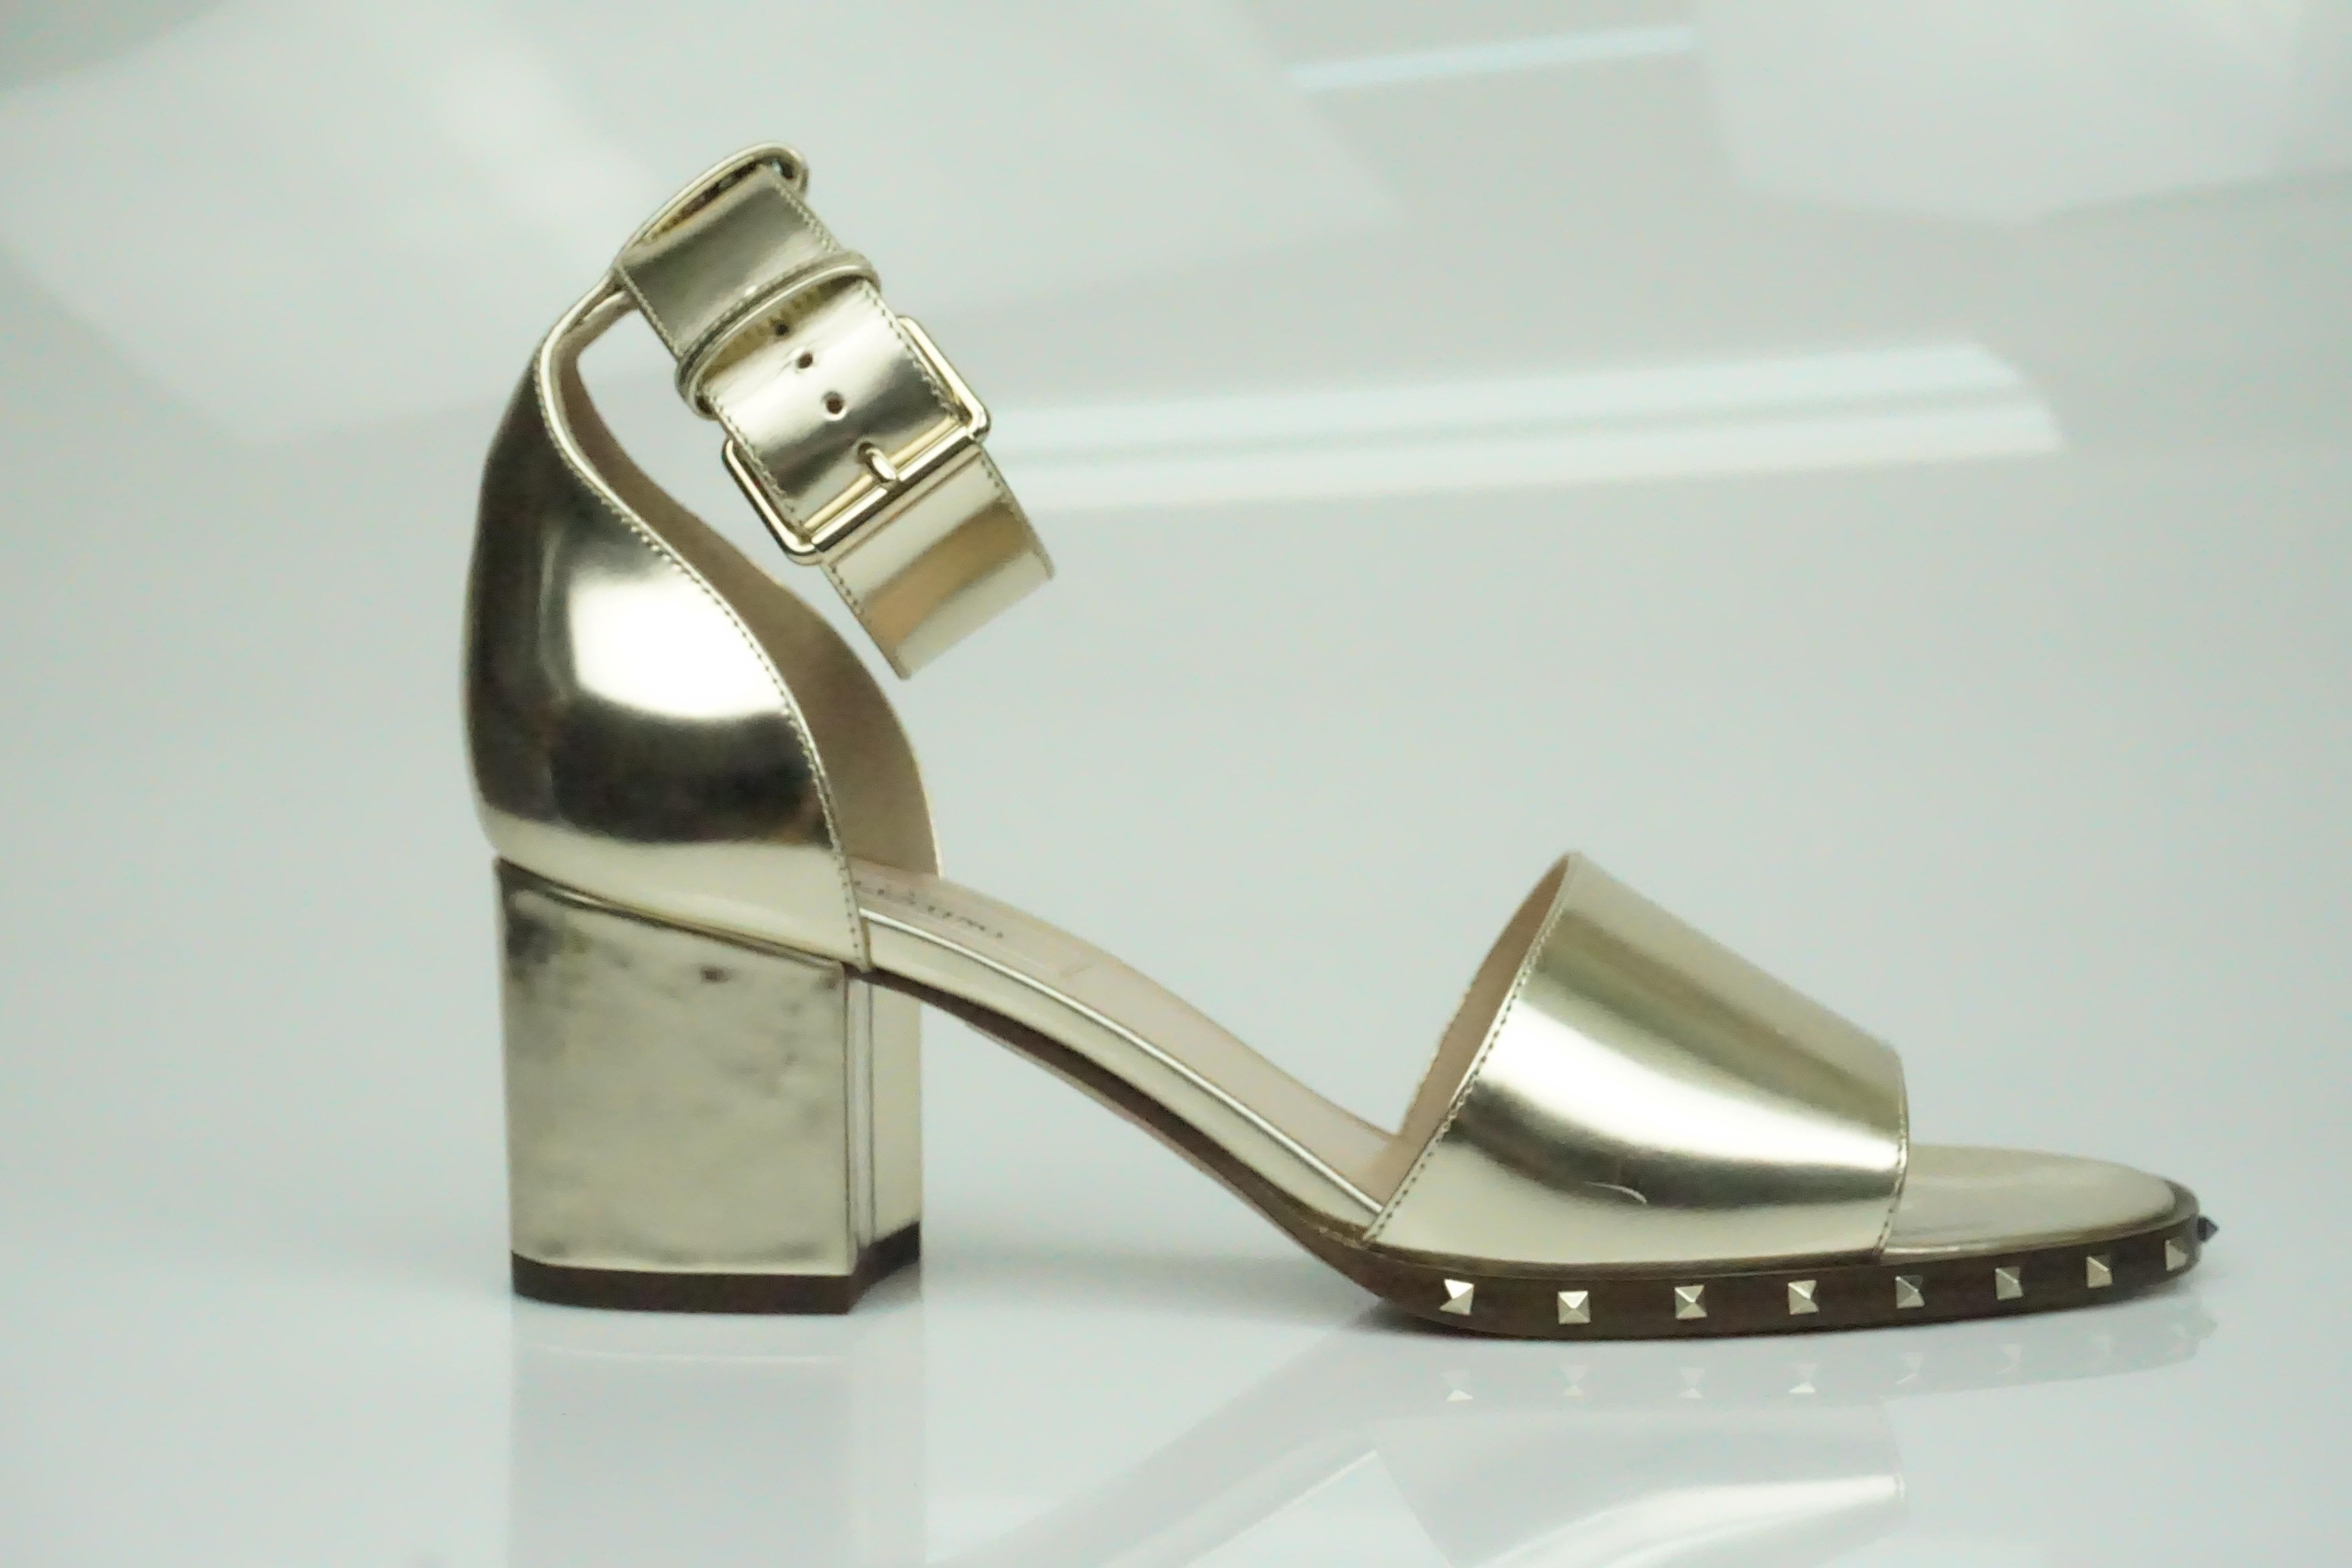 Valentino Gold Leather Soul Rockstud Ankle Strap Block Heel - 36.5  These beautiful heels are in excellent condition. They have barely been worn and look brand new. The shoe has studs surrounding the front foot. There is an ankle strap that is 1